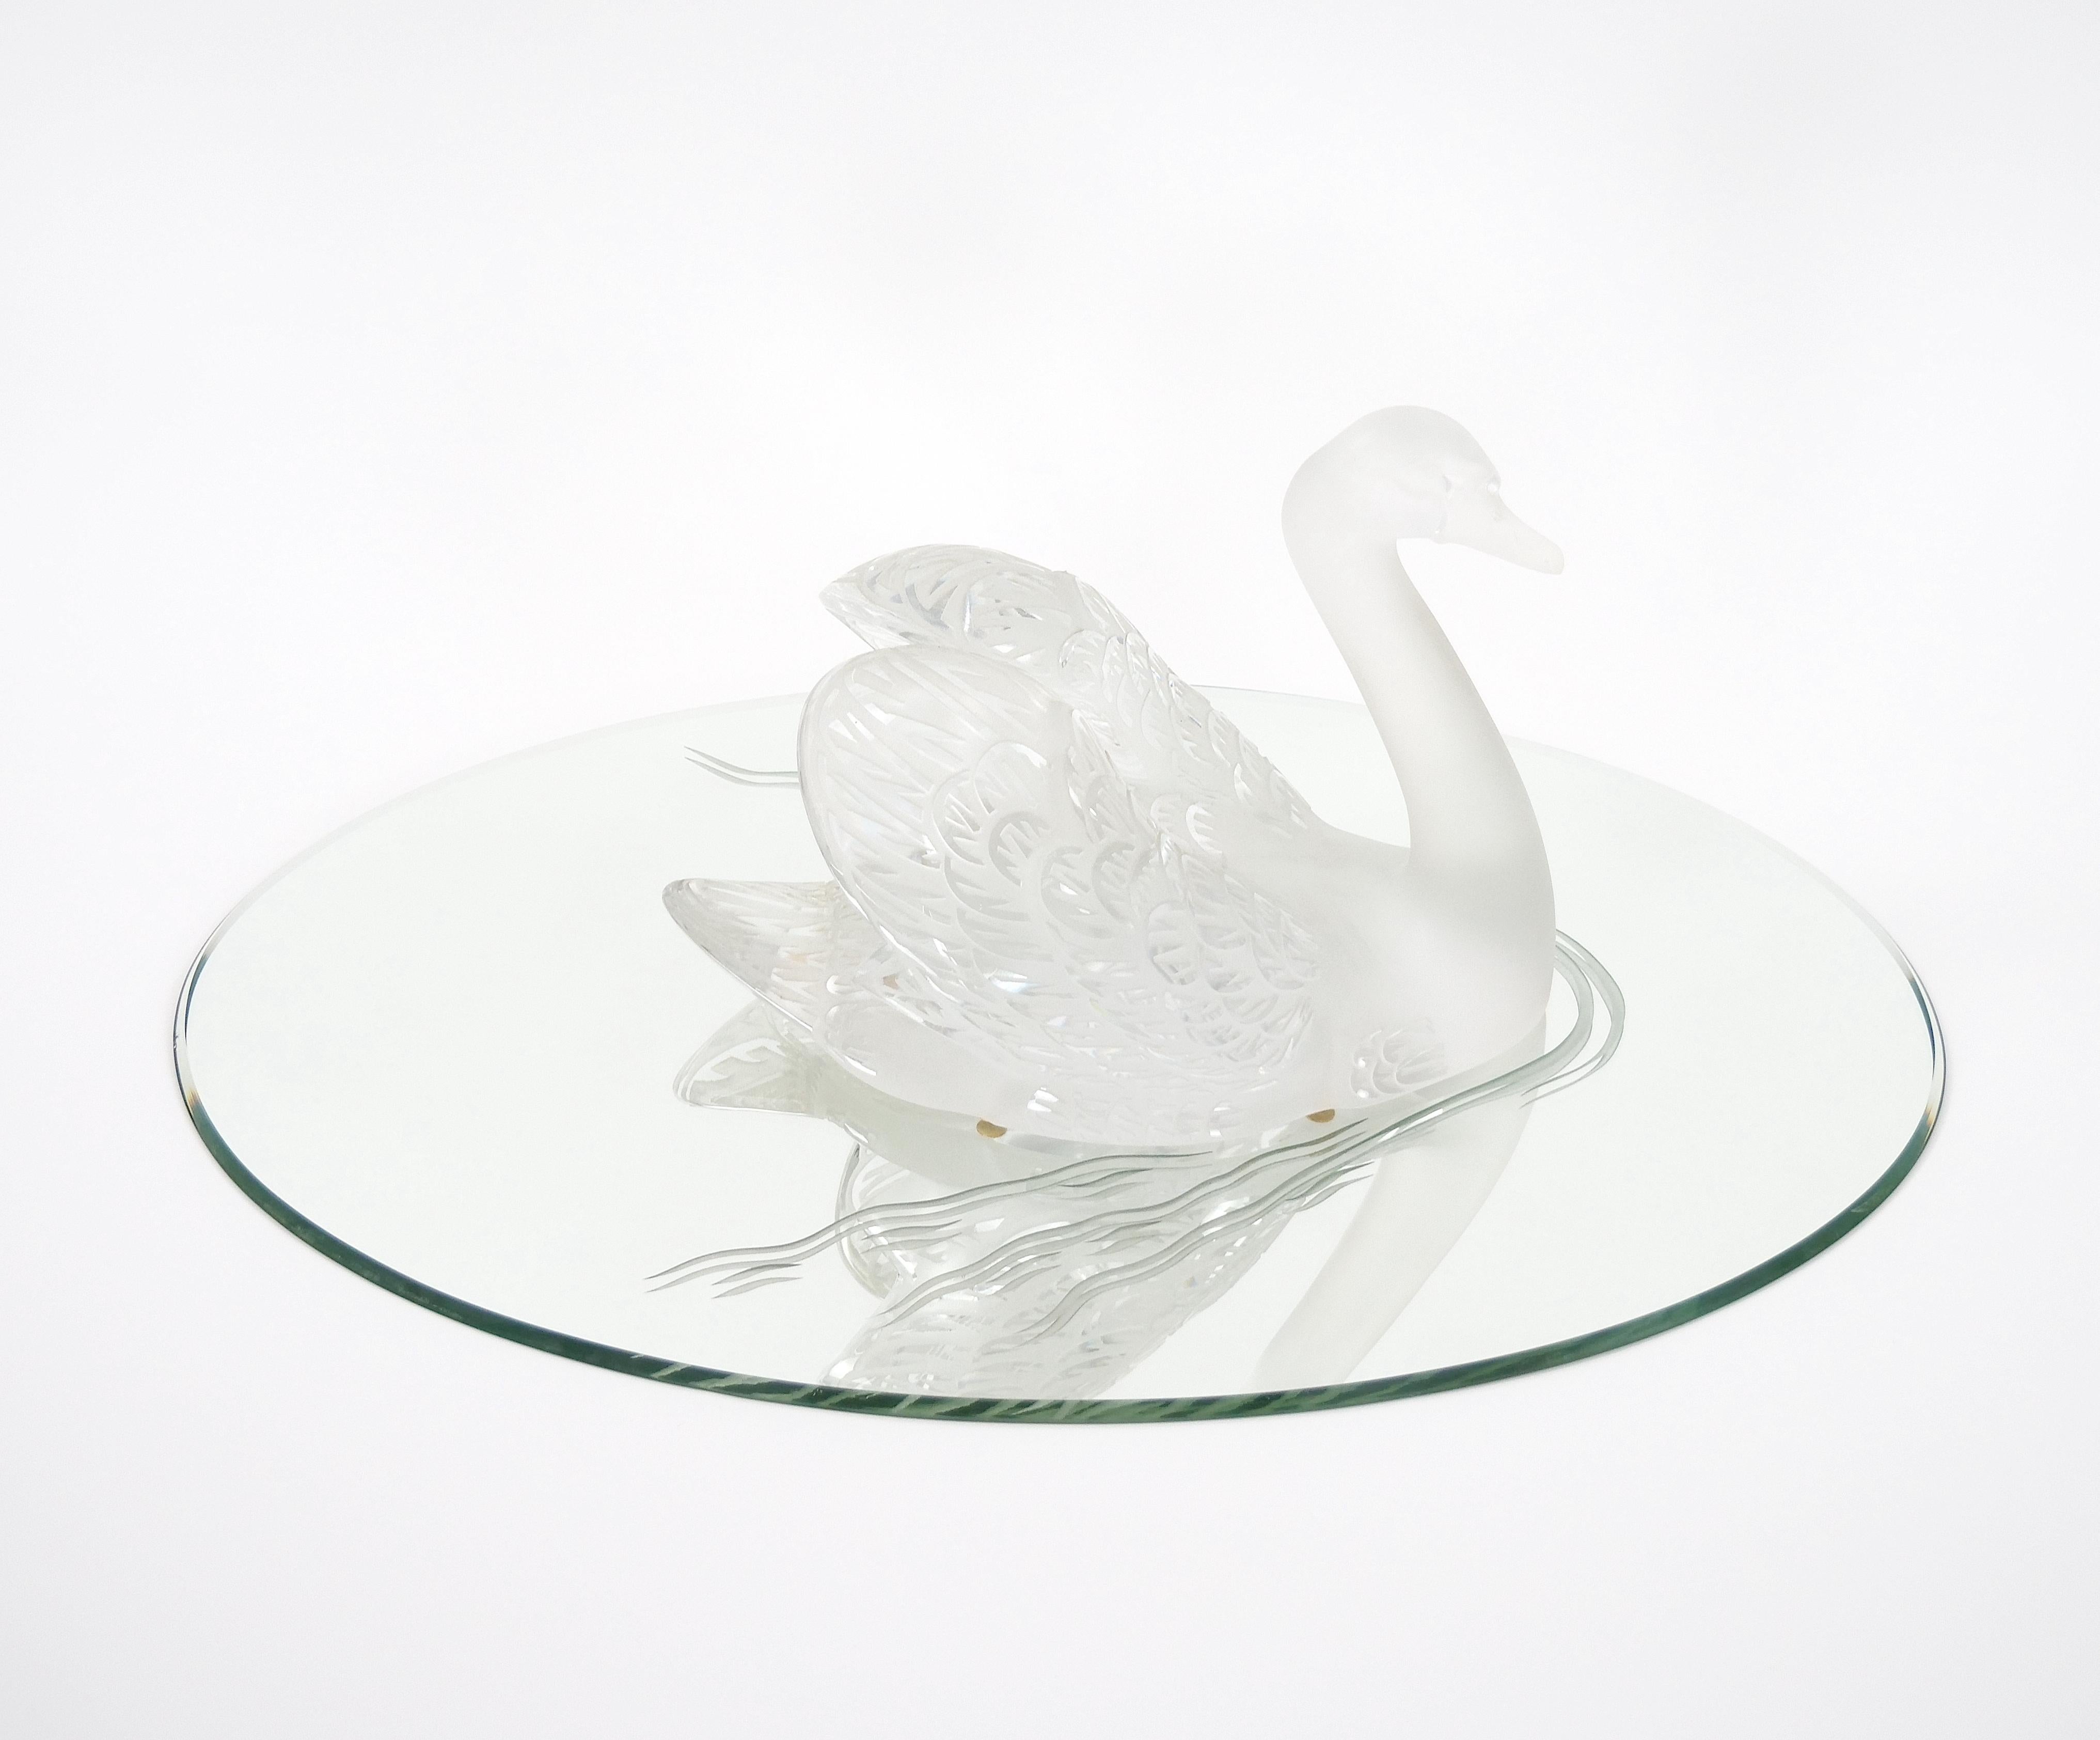 Elevate your decor with this exquisite Lalique Crystal Large Frosted Swan Sculpture, elegantly poised with its head gracefully lowered, resting on a fitted oval mirror base. This sculpture is a true masterpiece of artistry and craftsmanship, bearing